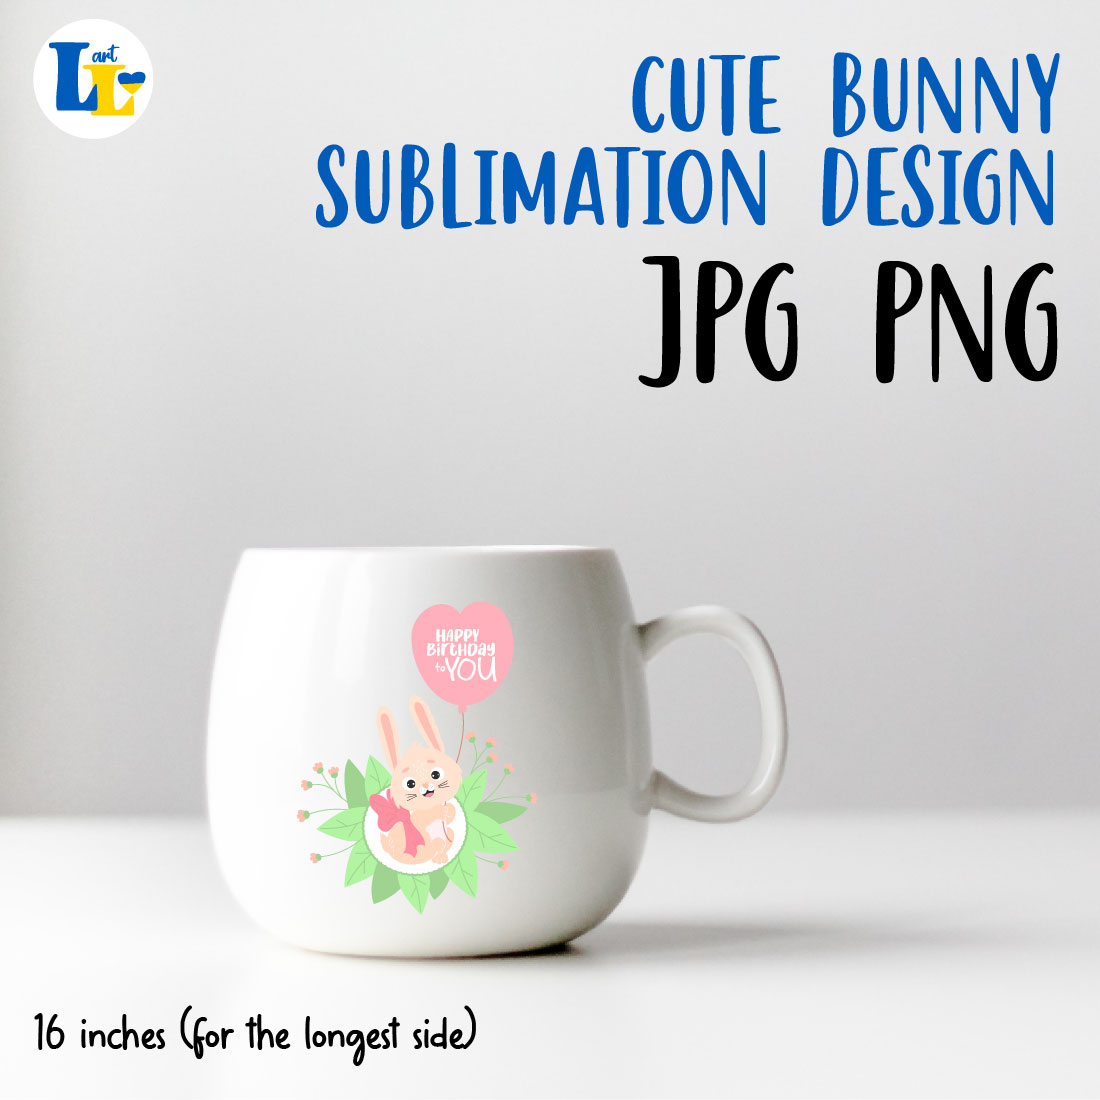 Happy Birthday to You. Cute Rabbit cup.